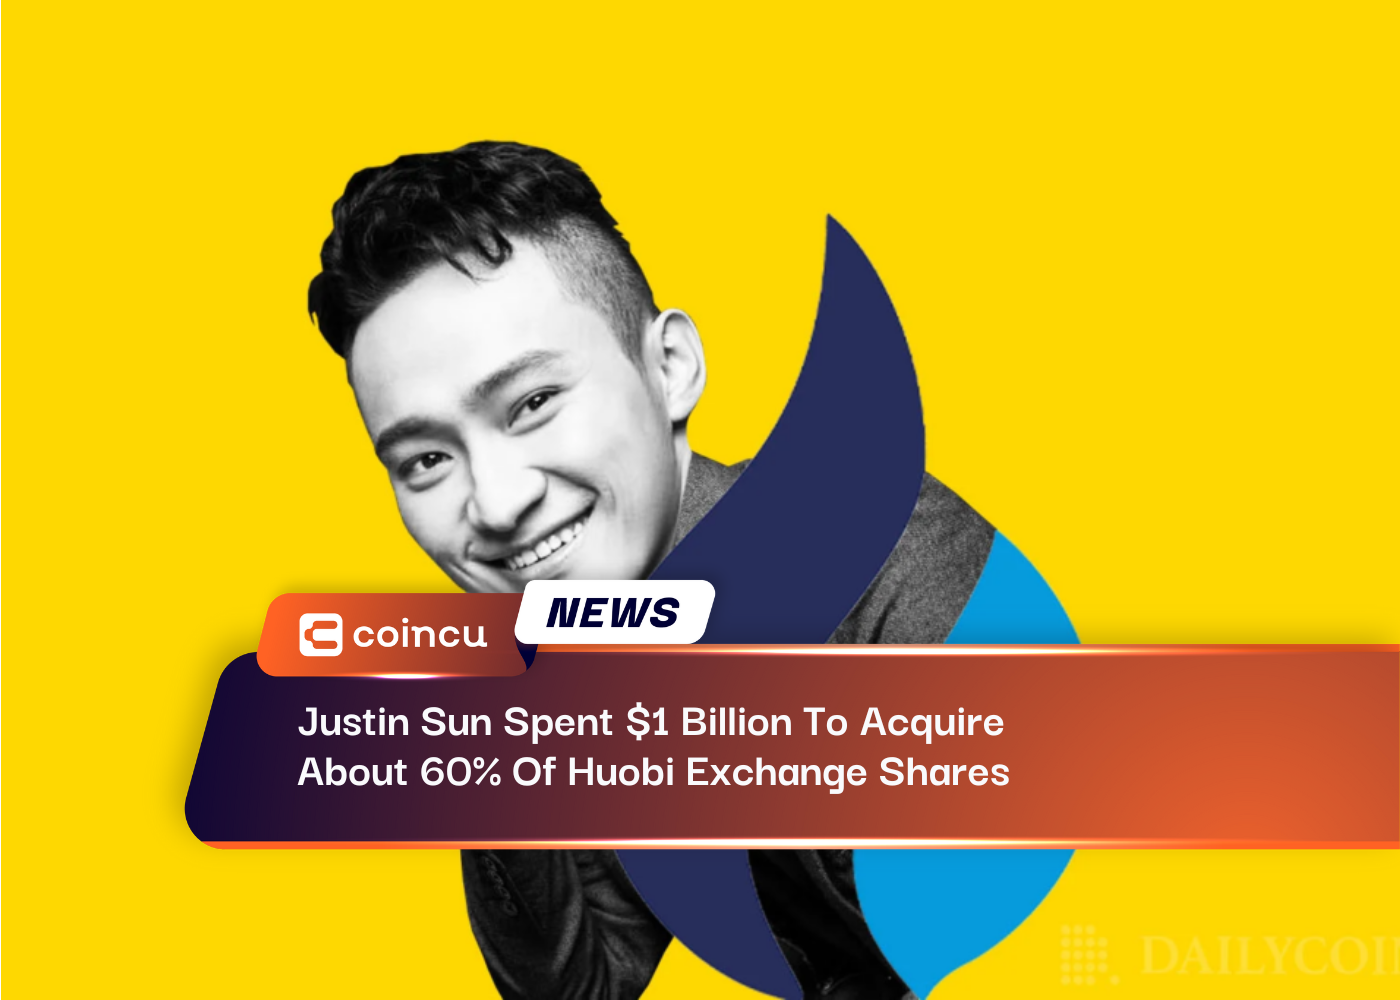 Justin Sun Spent $1 Billion To Acquire About 60% Of Huobi Exchange Shares